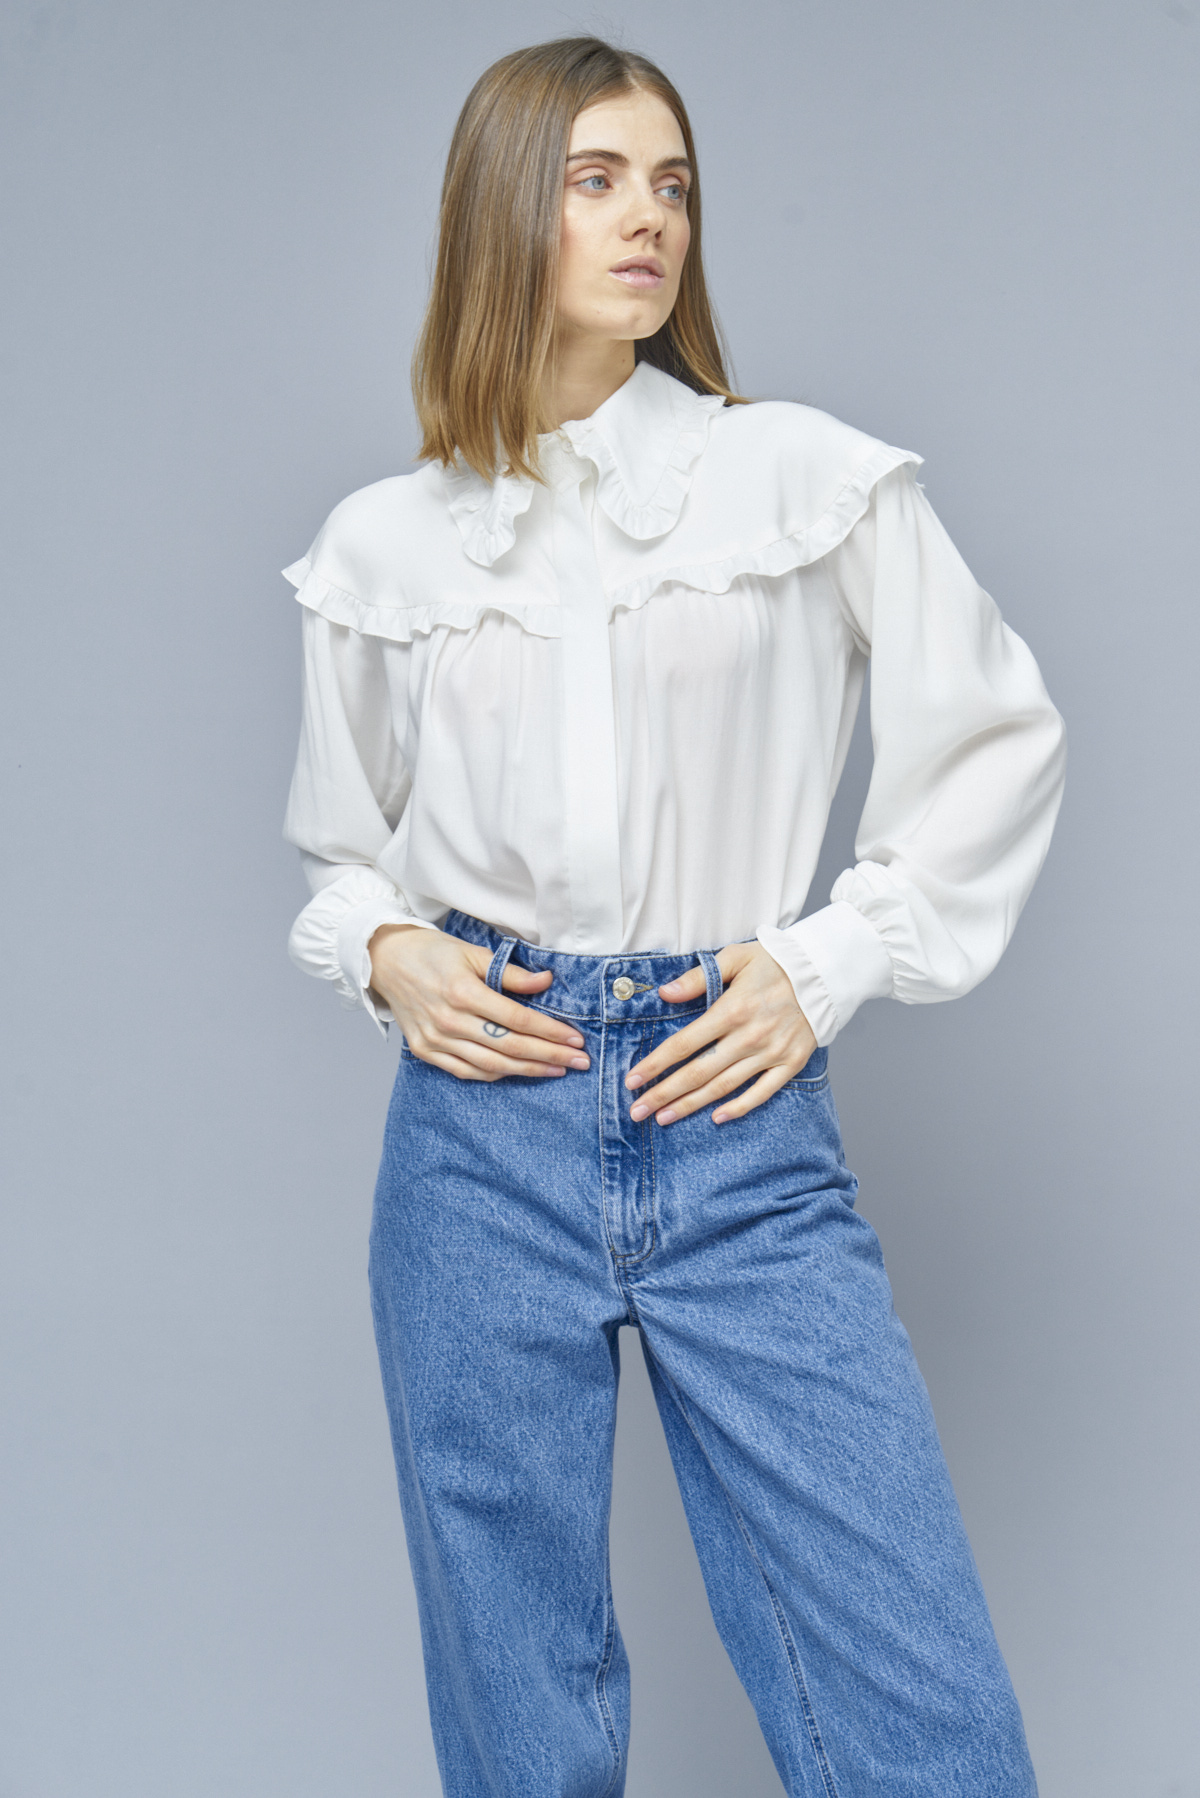 Milk-colored blouse-shirt with ruffles, photo 2